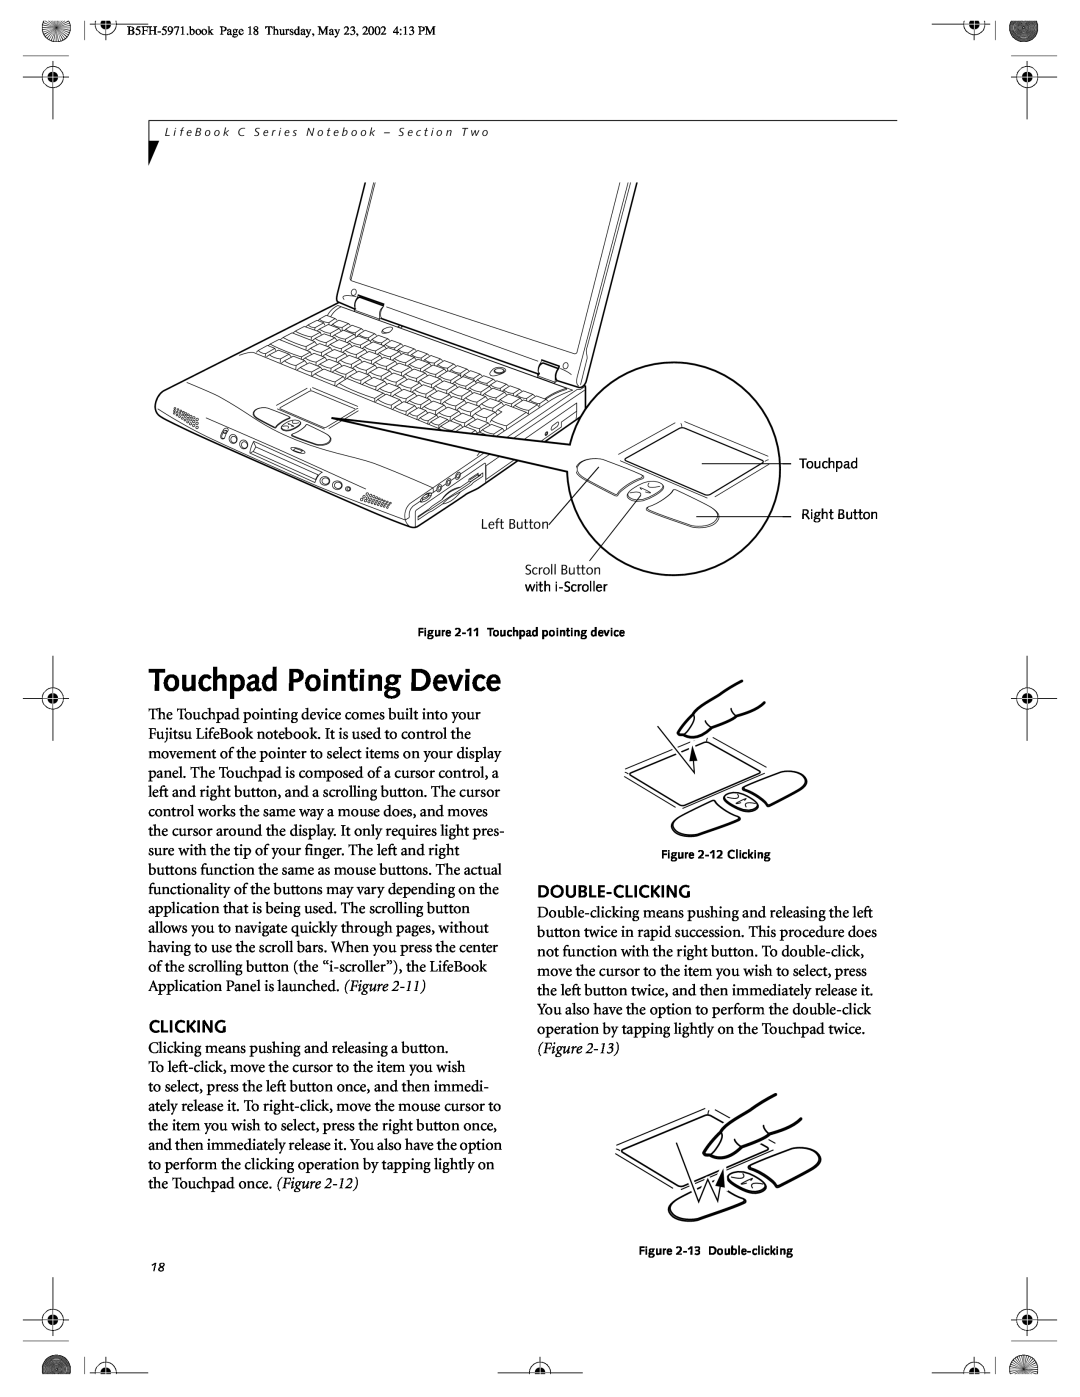 Fujitsu C2111, C2010 manual Touchpad Pointing Device, Double-Clicking 